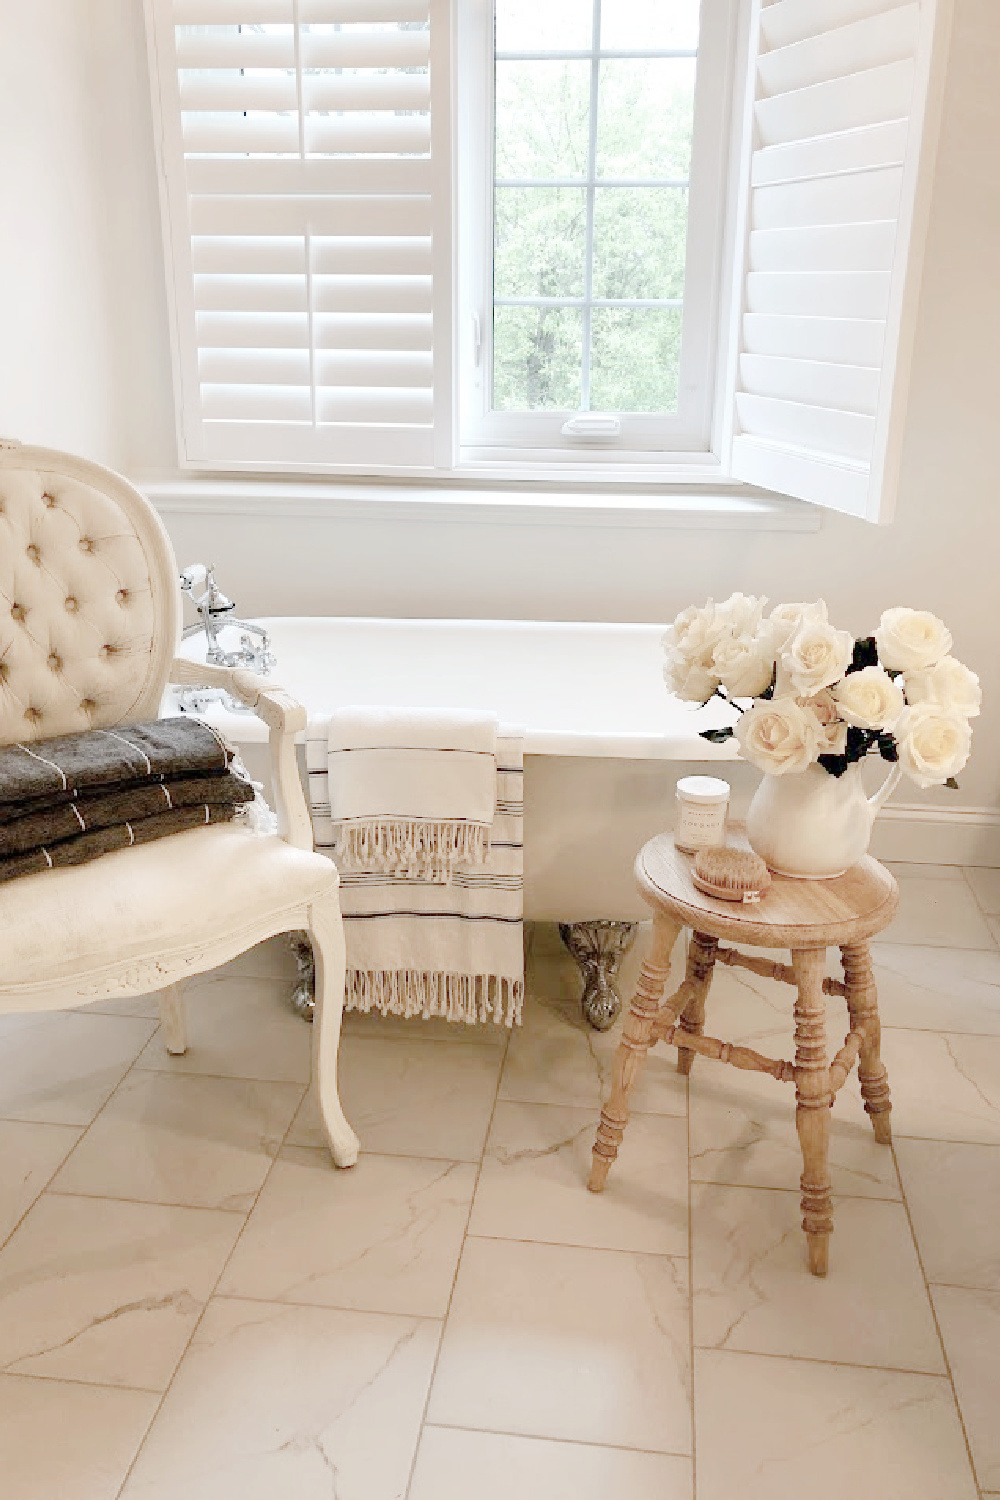 Modern French white bathroom with clawfoot tub, white roses, Louis chair, and rustic wood stool - Hello Lovely Studio.